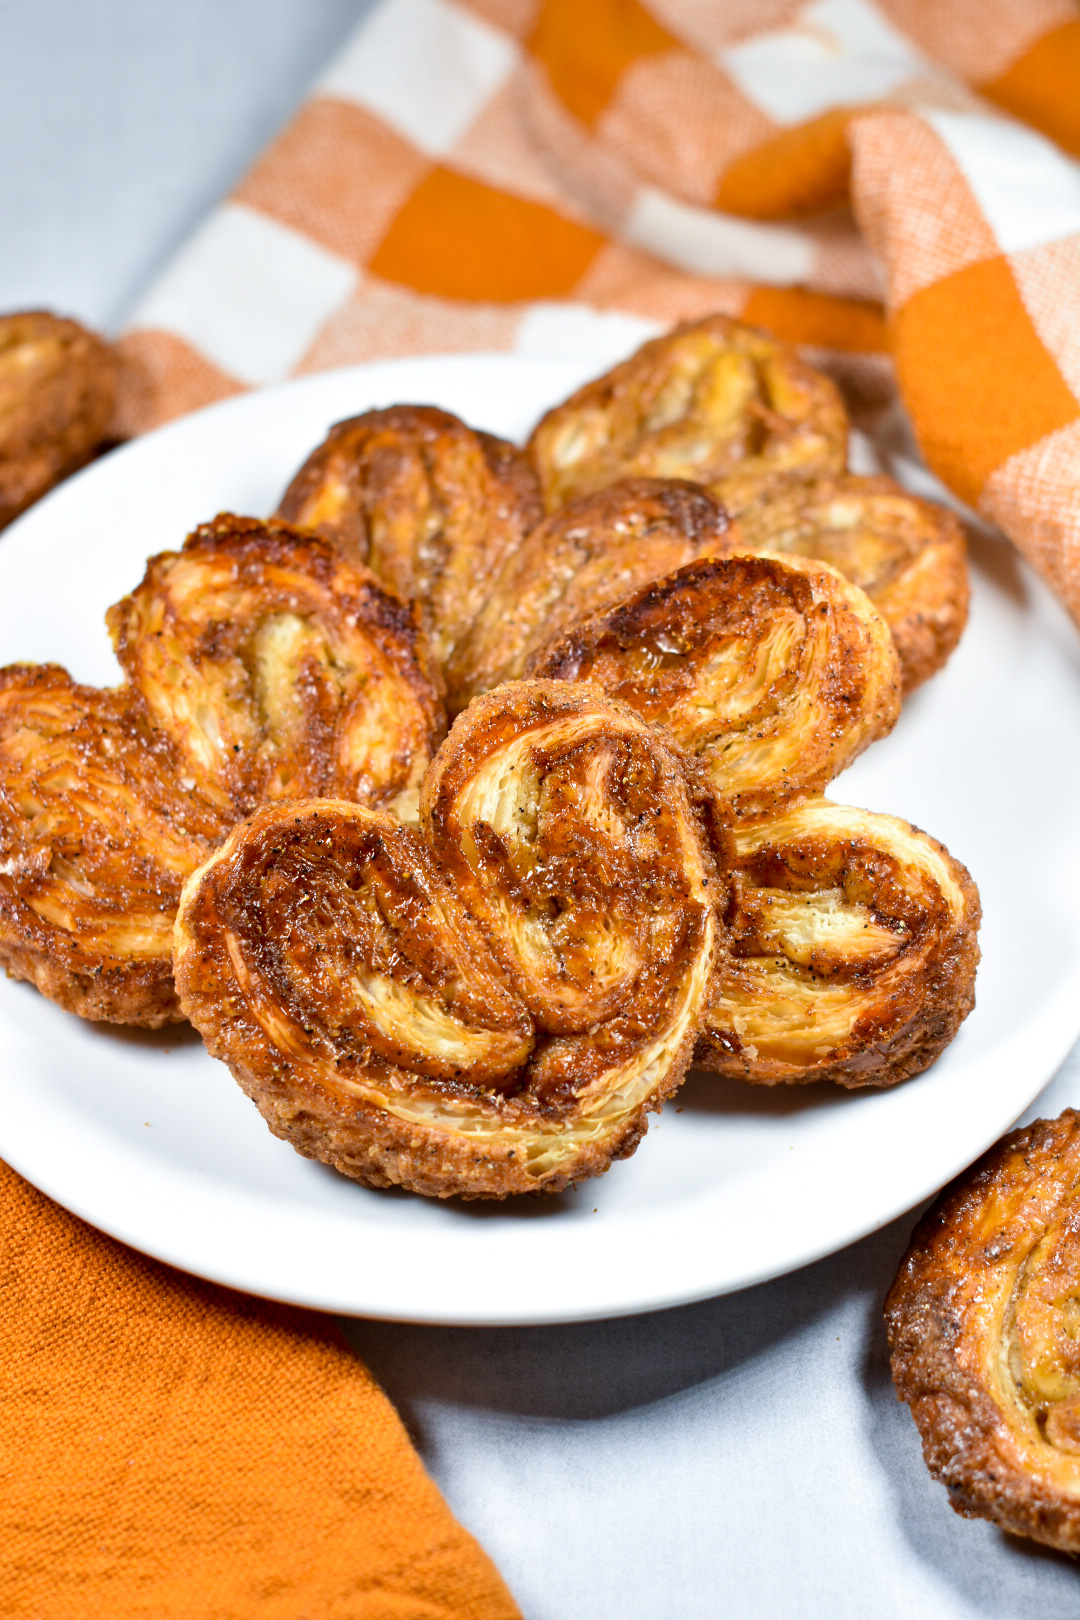 palmiers on a white plate